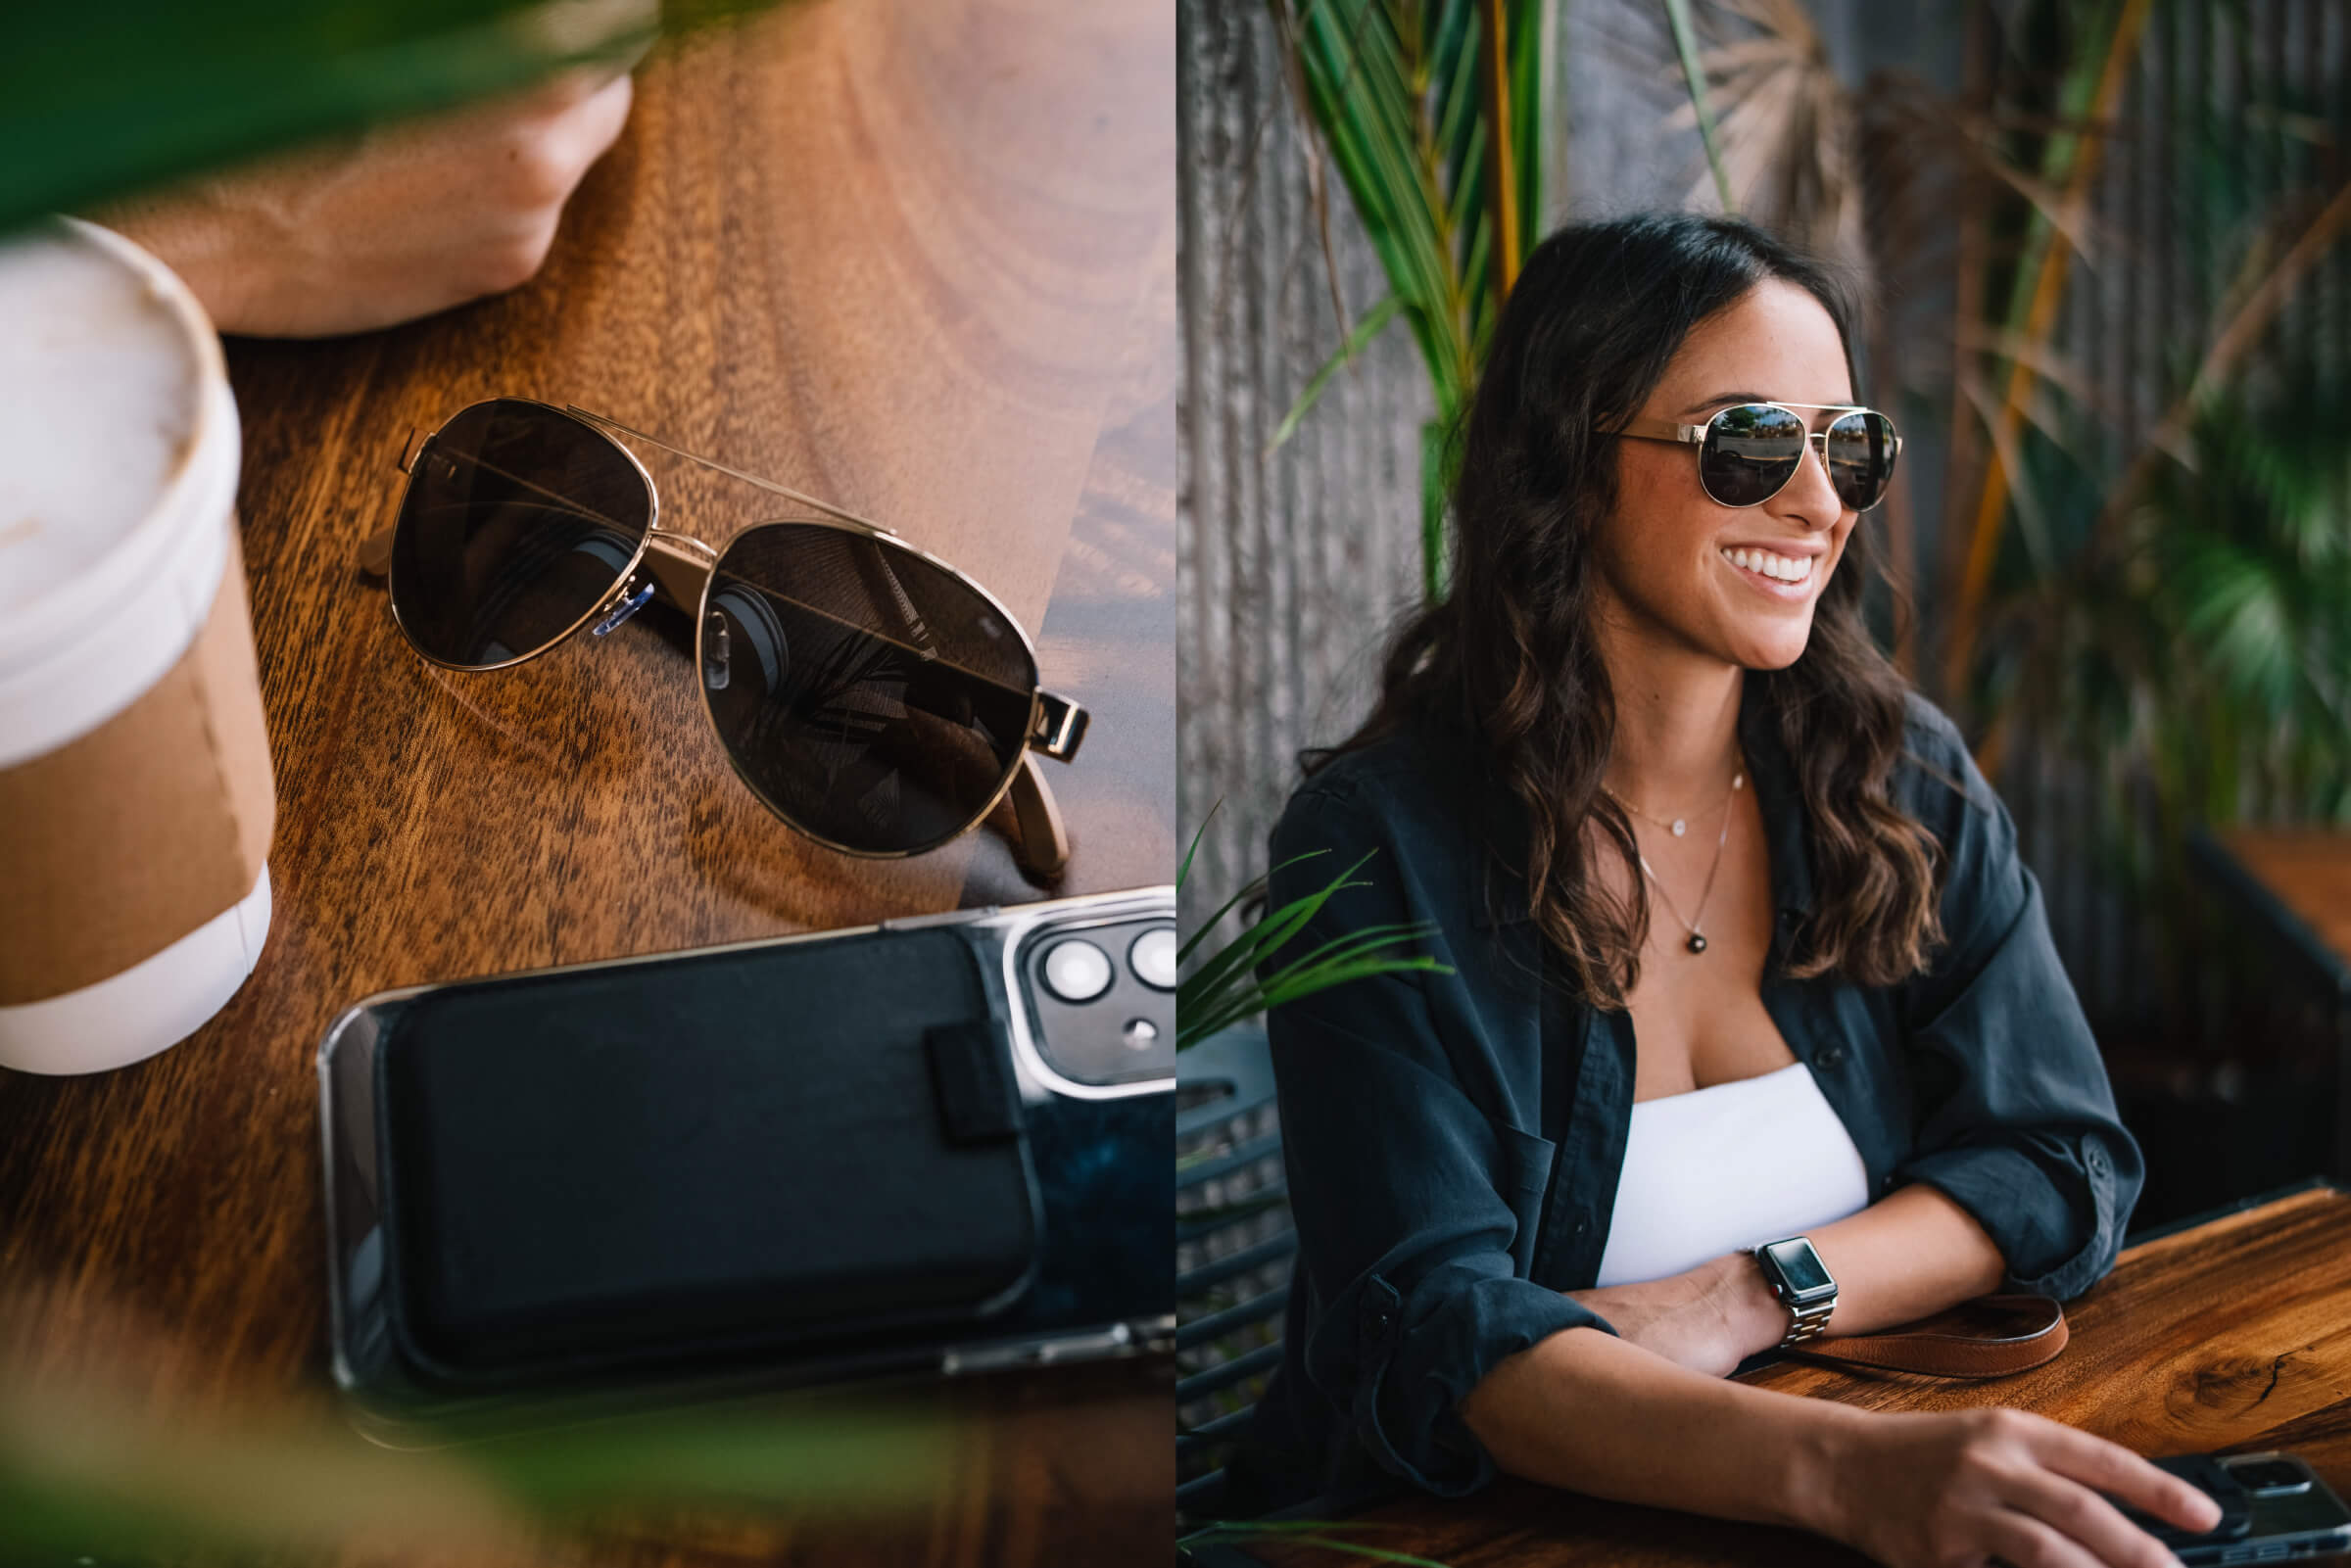 Two photos, one of a pair of titanium MagLock sunglasses sitting next to an iPhone, the other of a woman wearing Maverick aviator sunglasses at an outdoor cafe